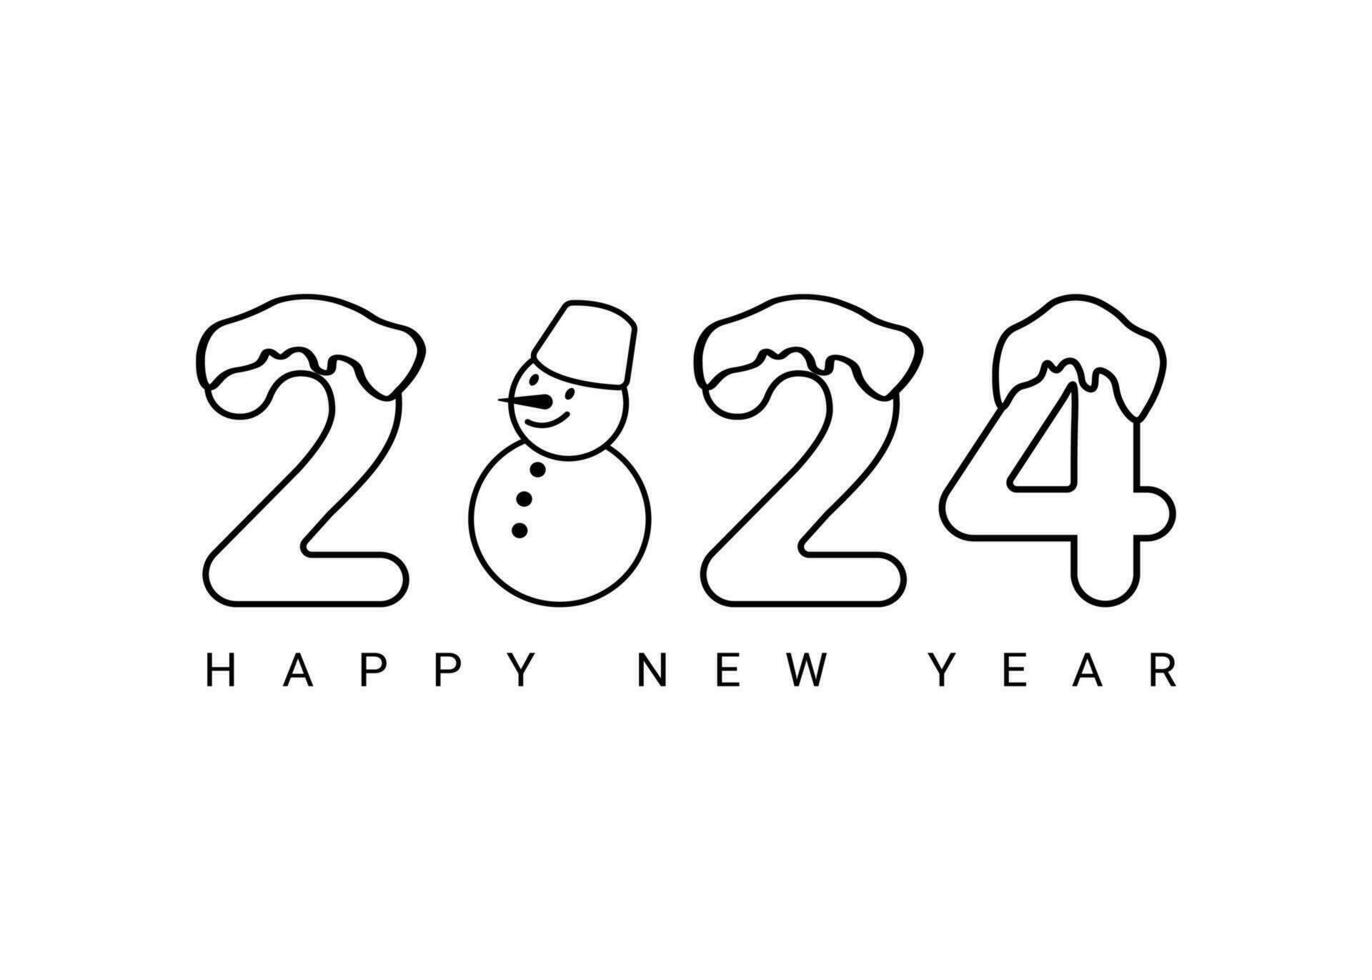 Vector design template for the number 2024 with snowman. The illustration includes a logo in the form of a black label, which can be used for diaries, notebooks, calendars, and web pages.